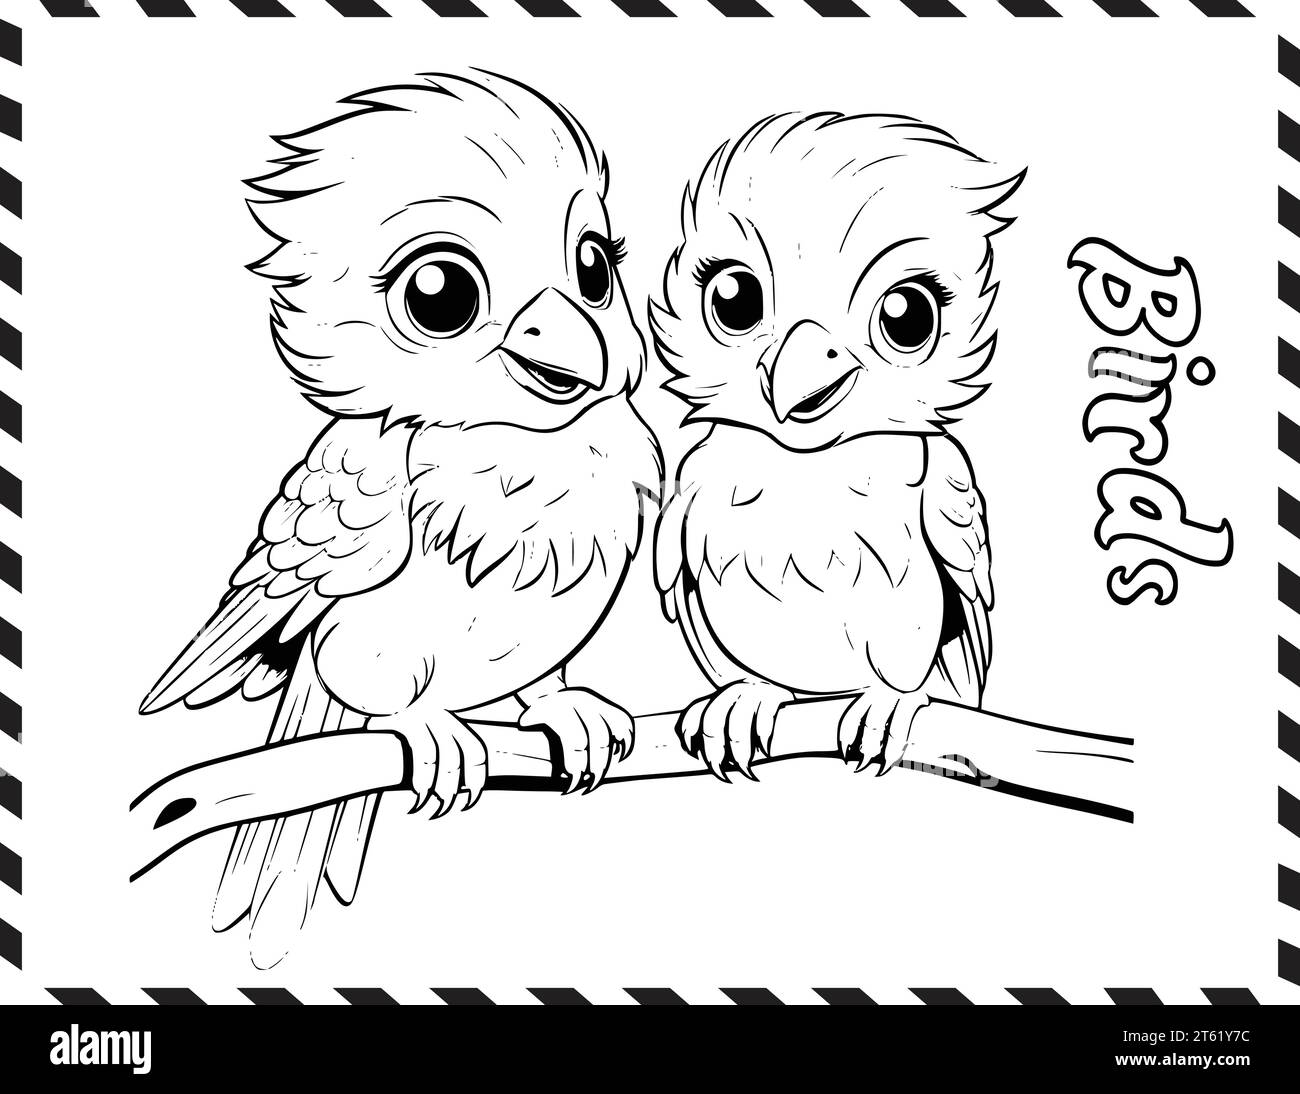 Page 10  Opila Bird Coloring Page Images - Free Download on Freepik